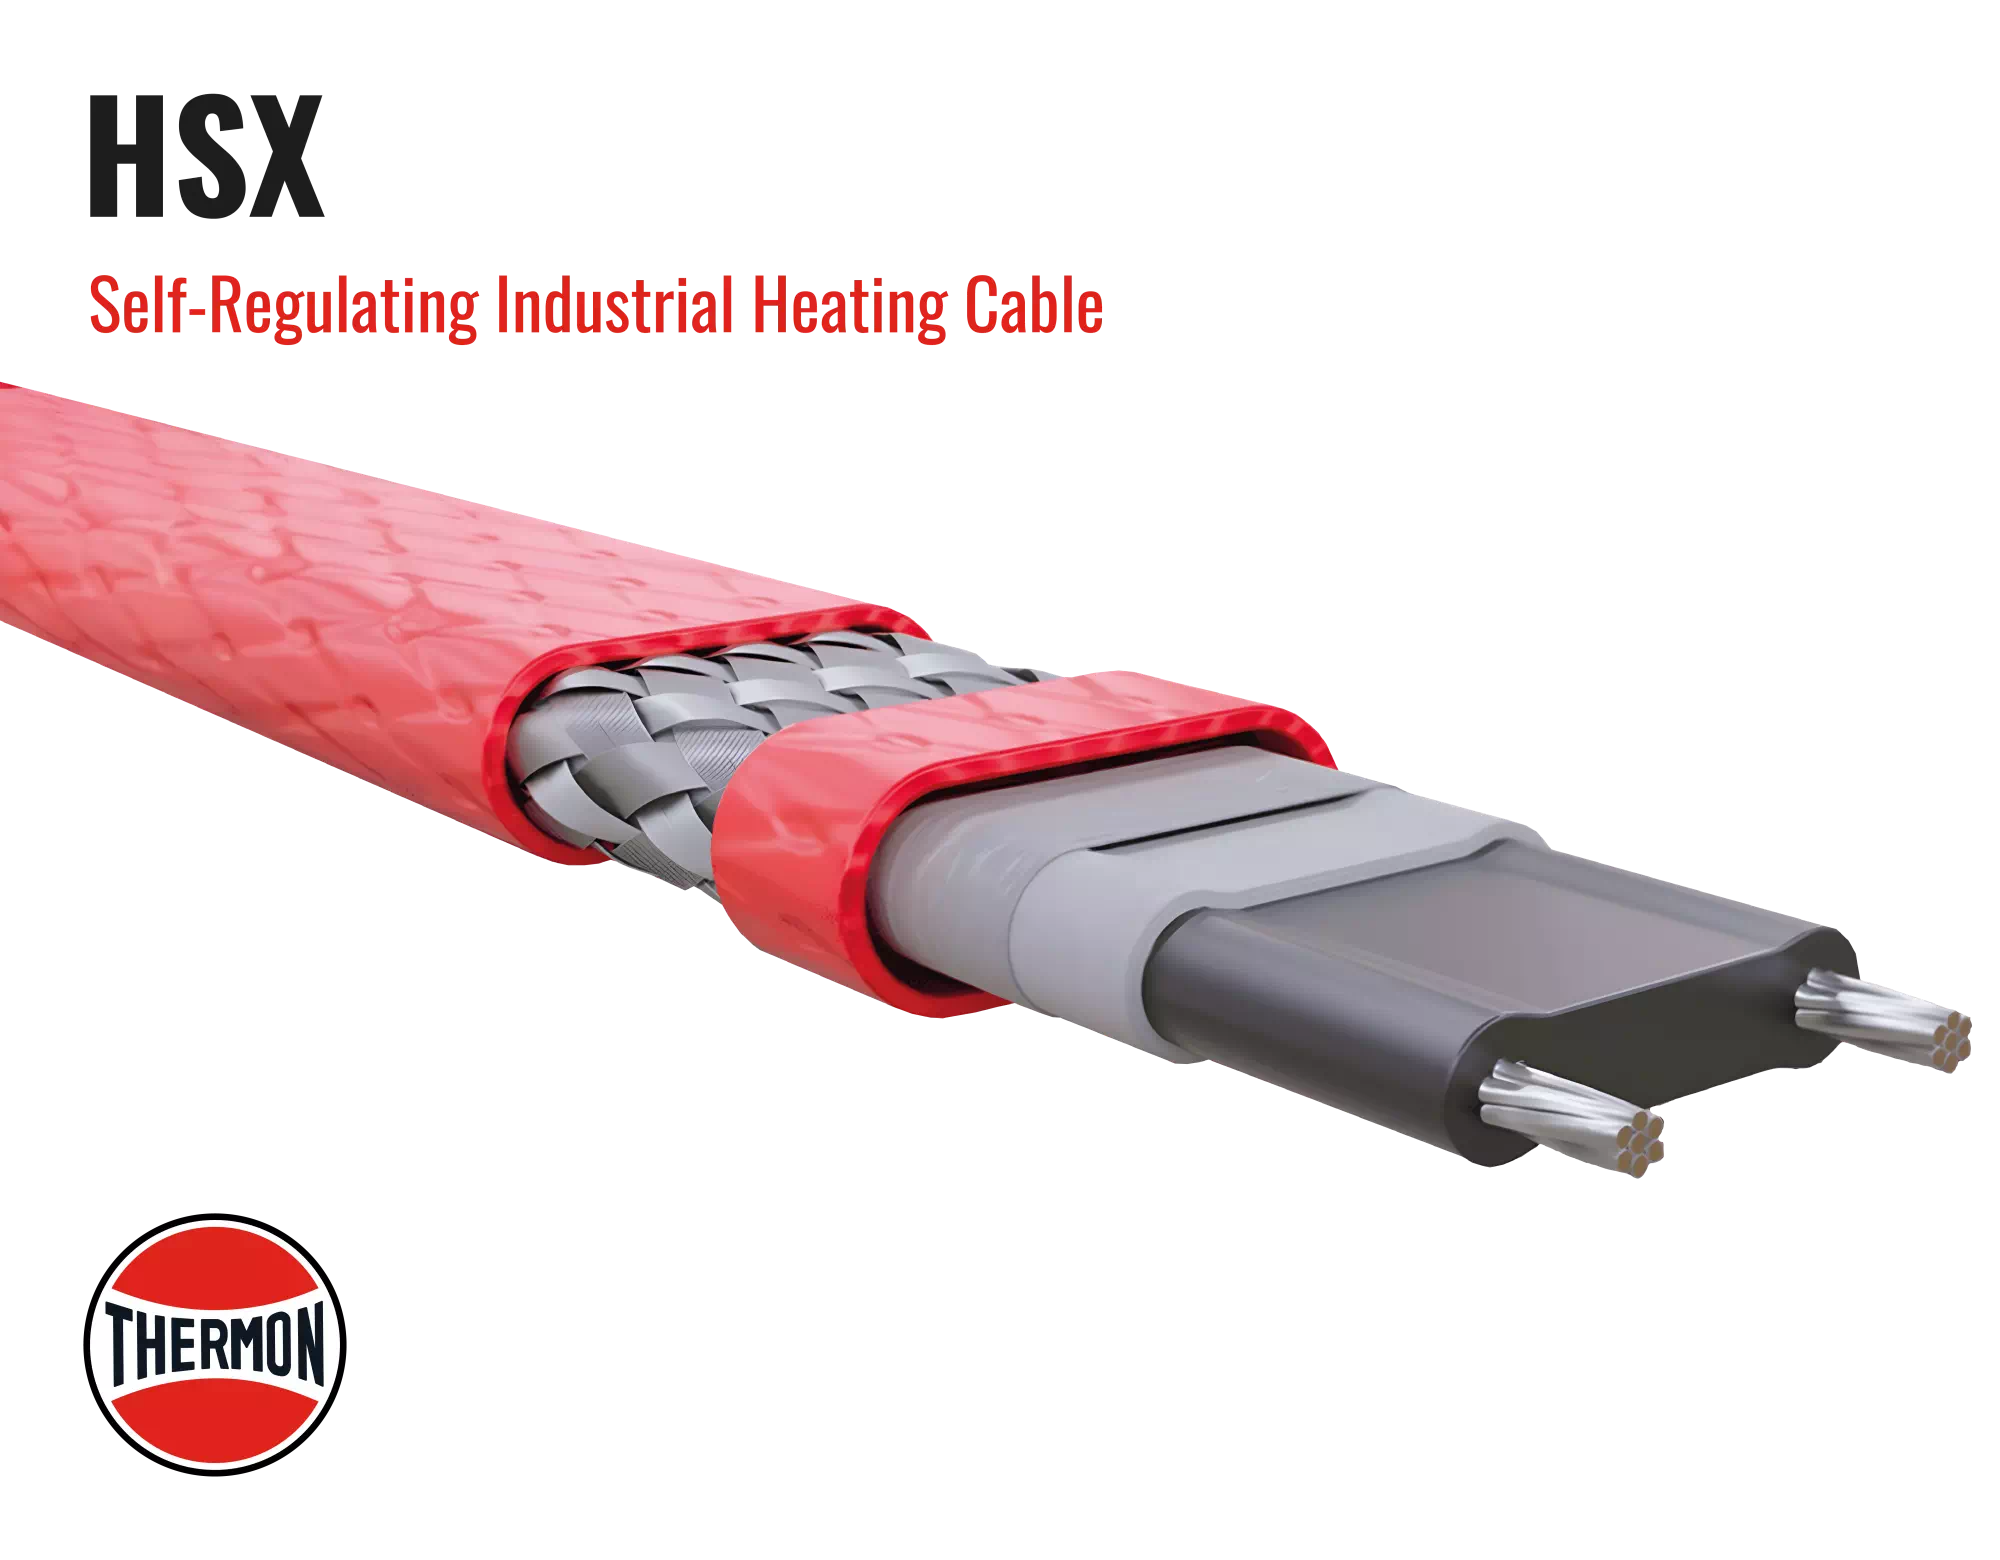 Thermon HSX-Self-Regulating-Heating-Cable